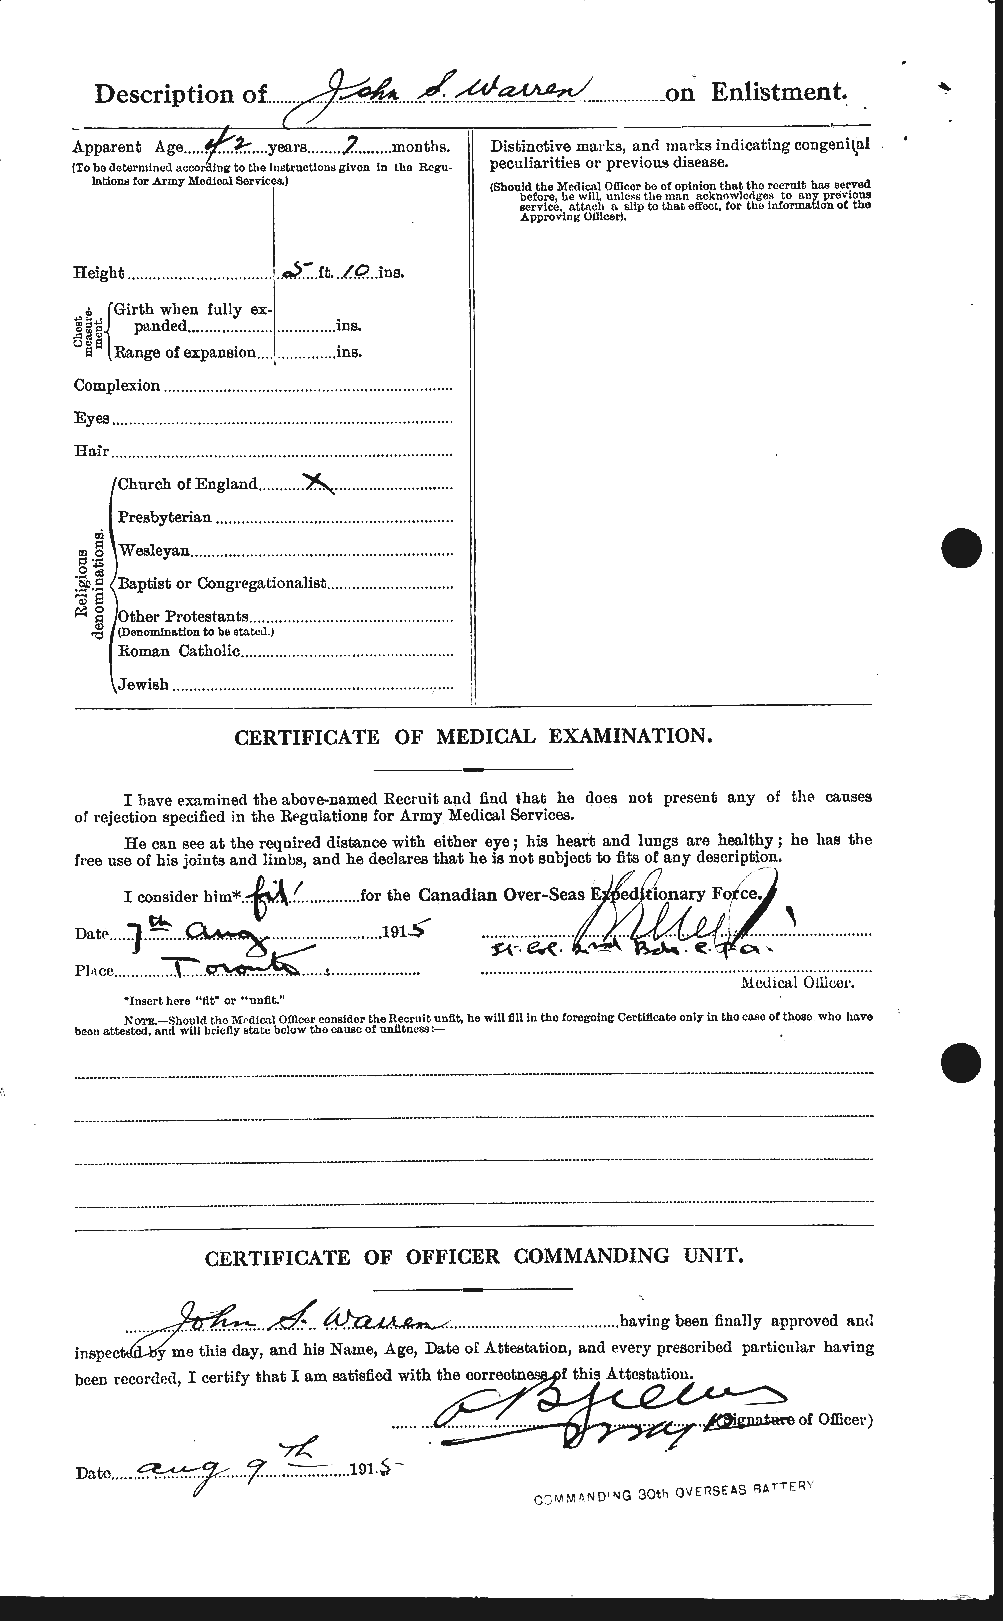 Personnel Records of the First World War - CEF 658560b